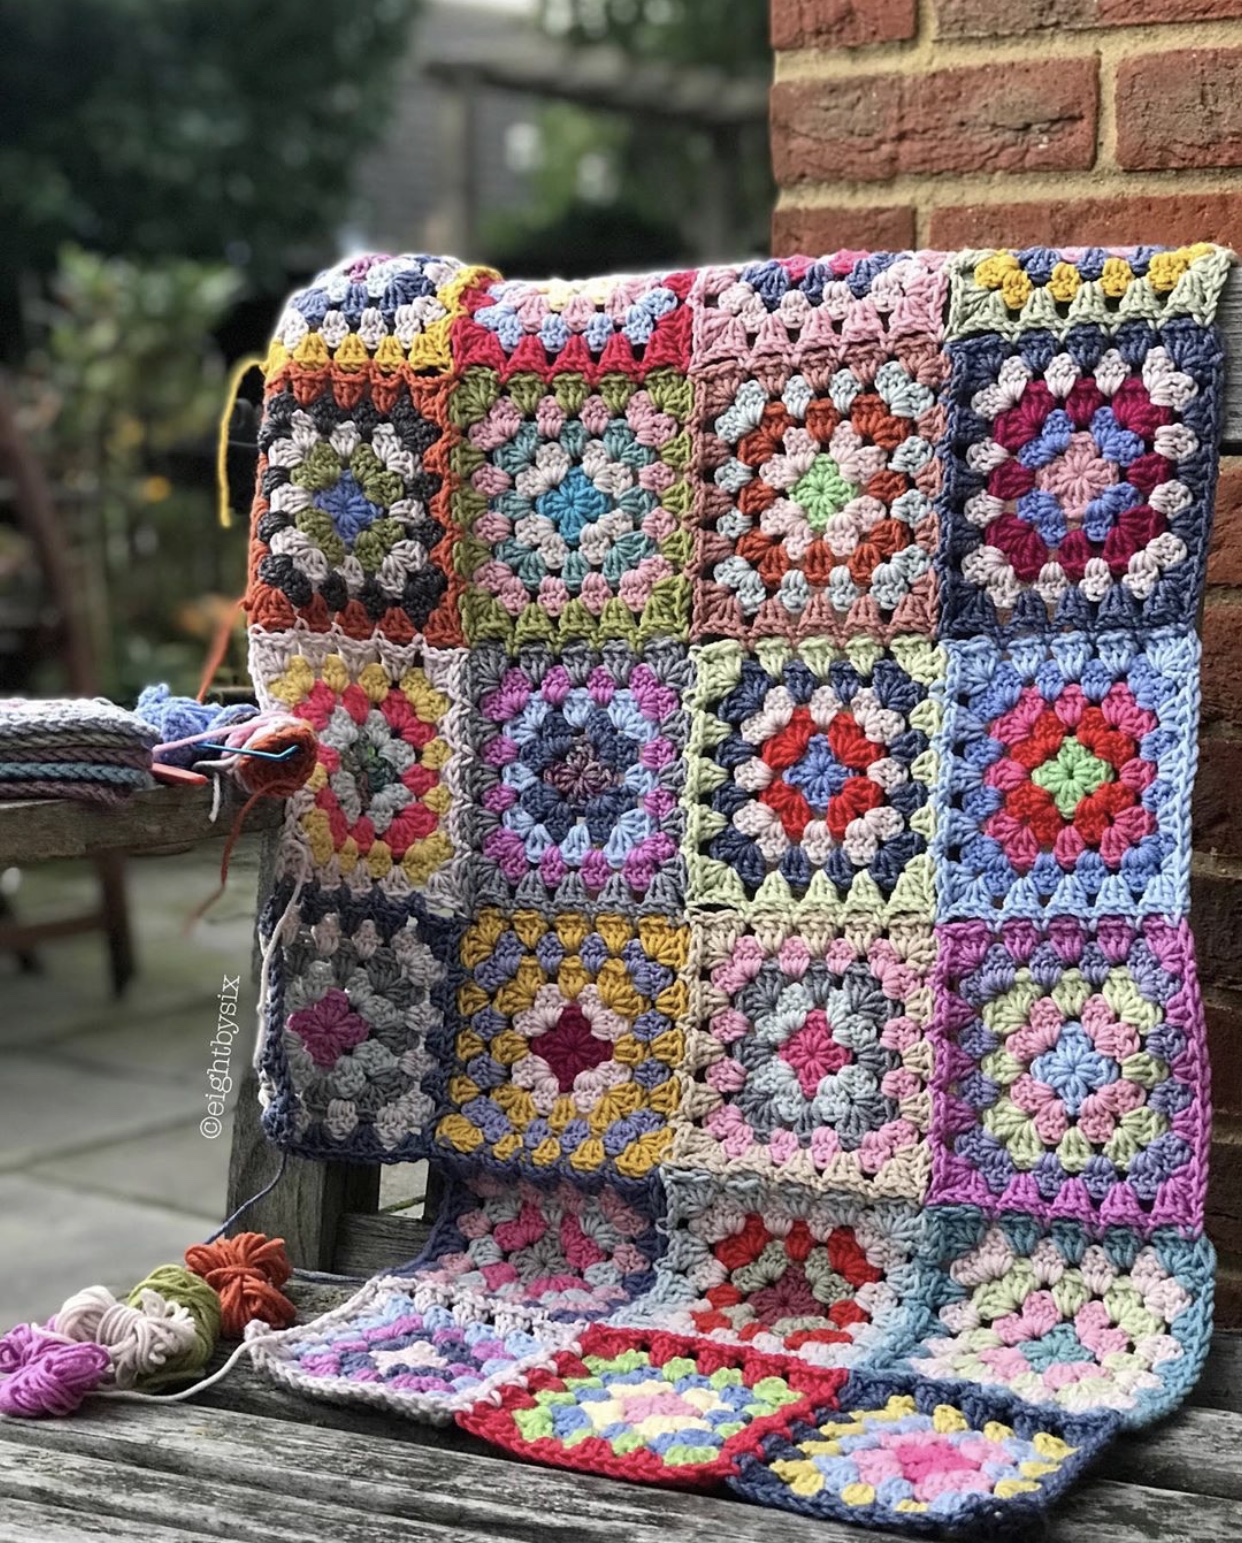 Another Granny Square Blanket